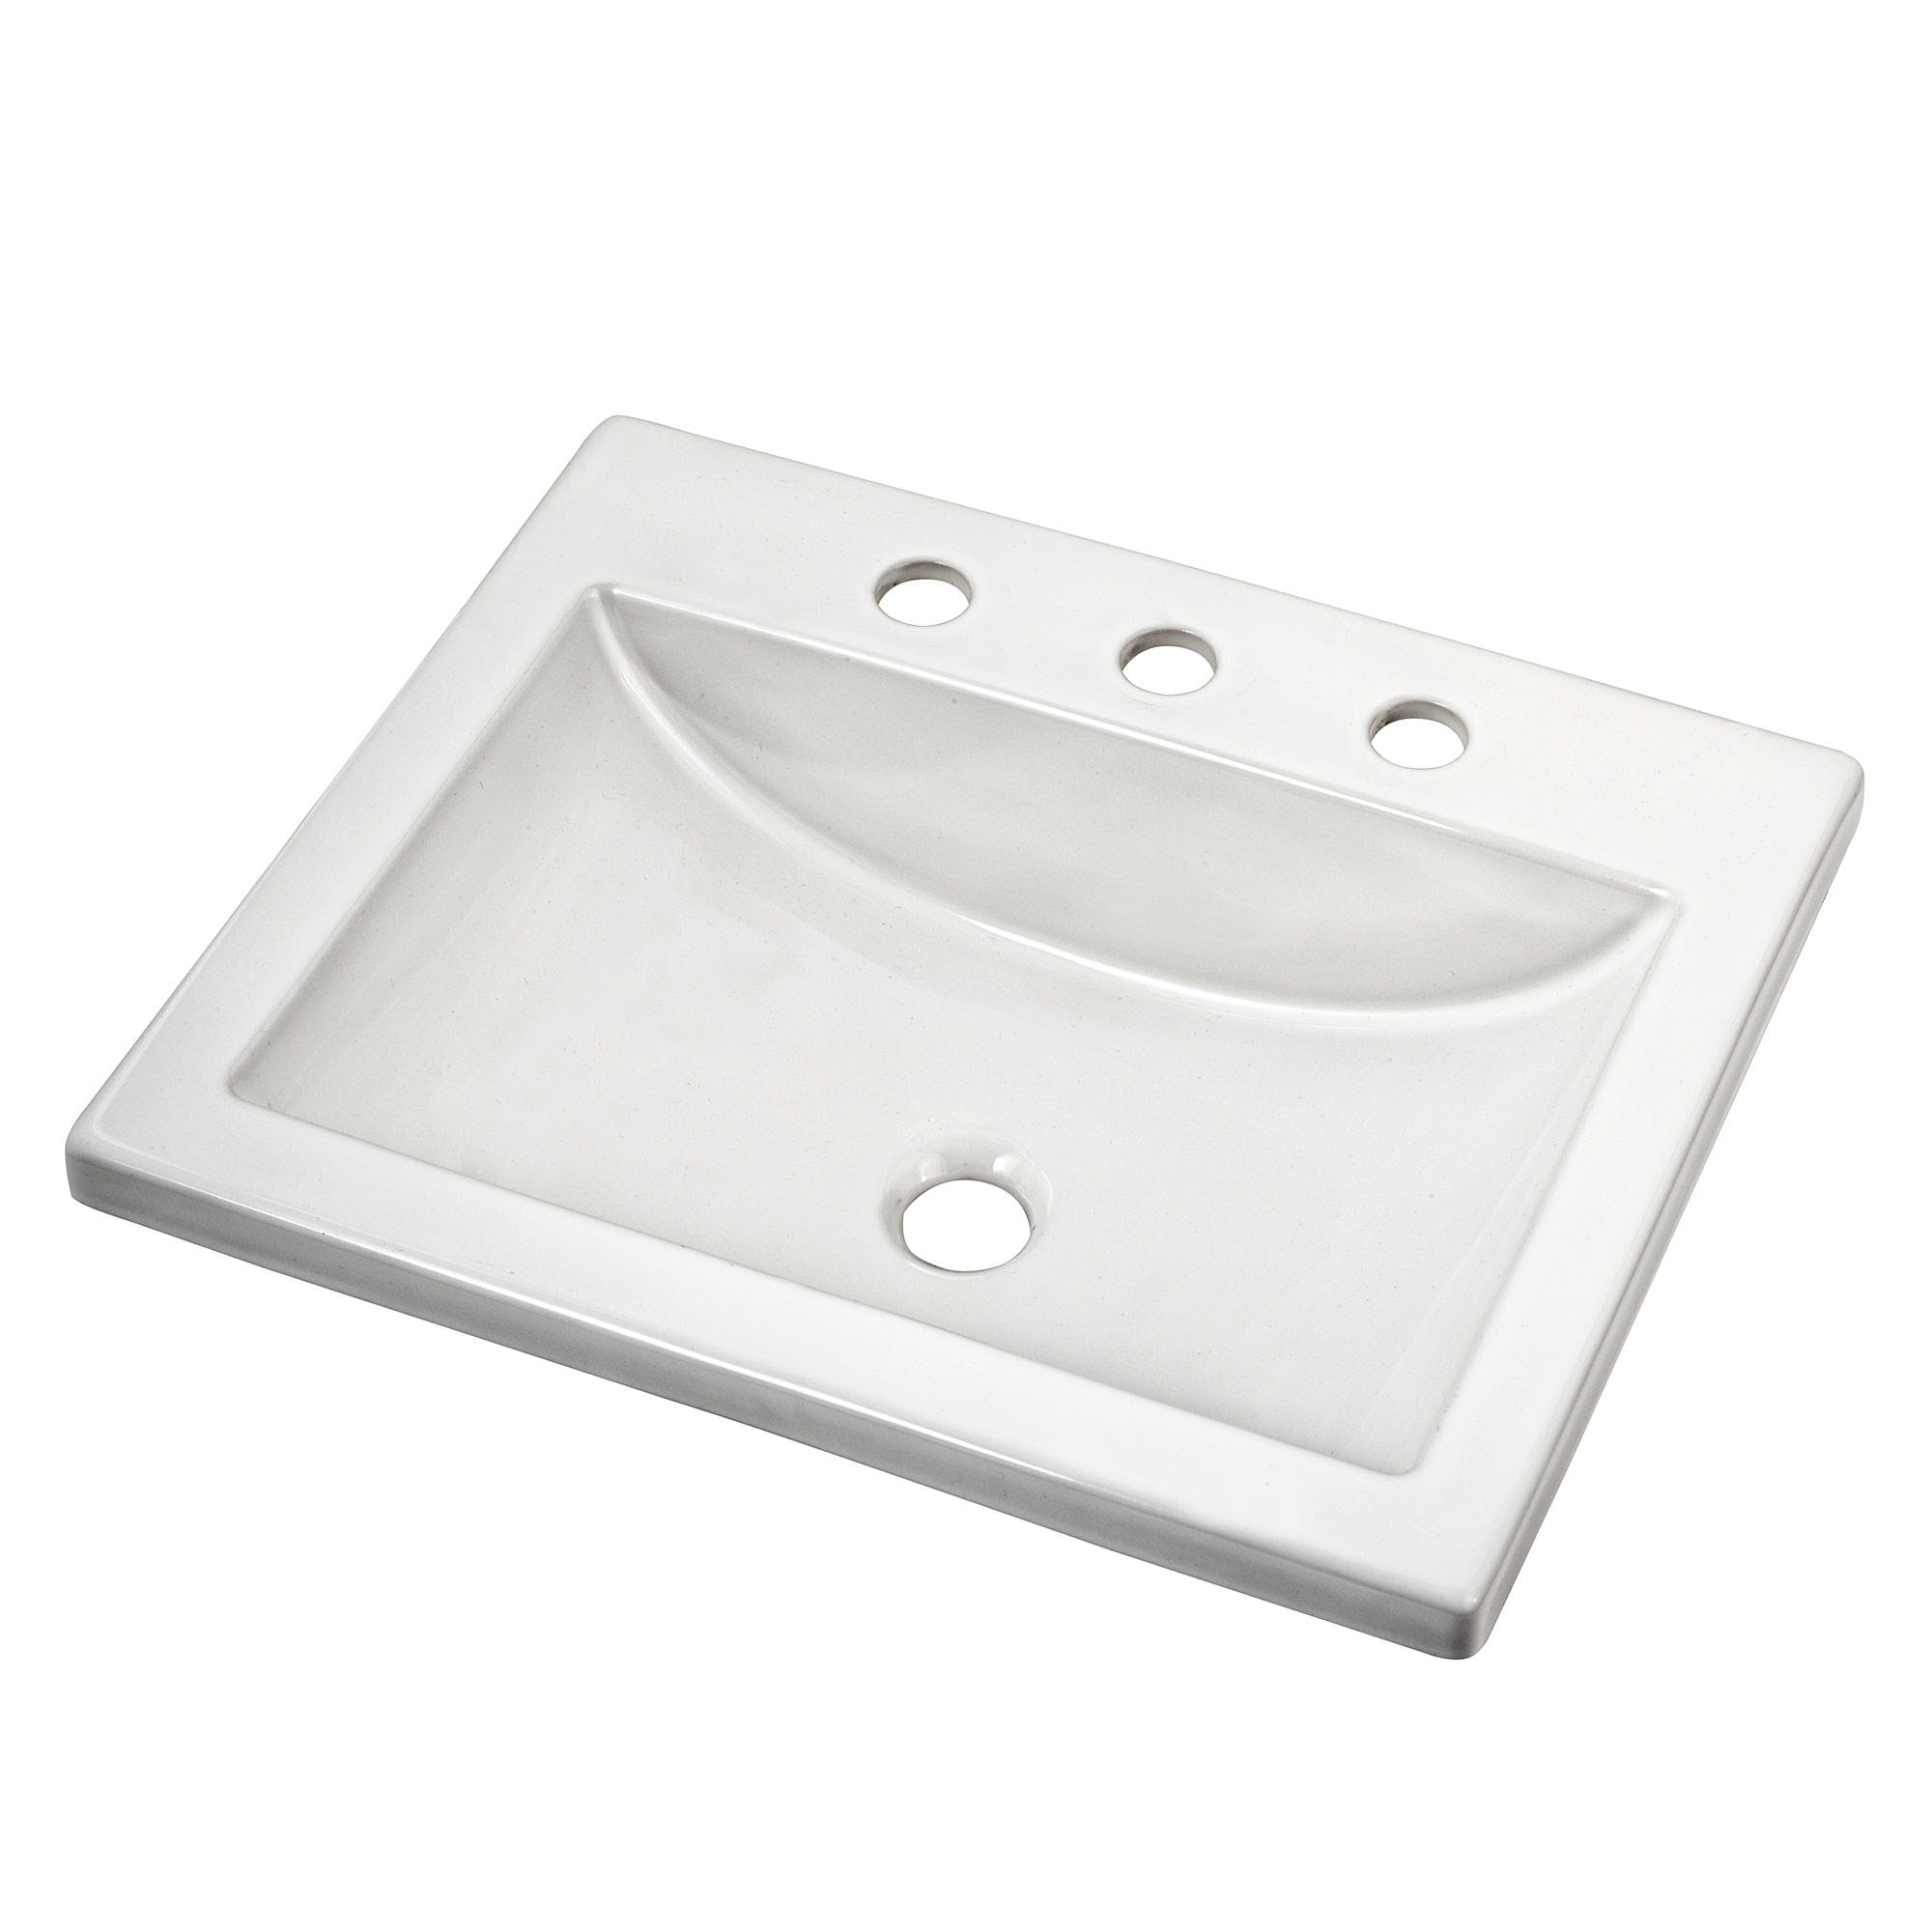 Studio Drop In Sink With 8 Inch Widespread WHITE